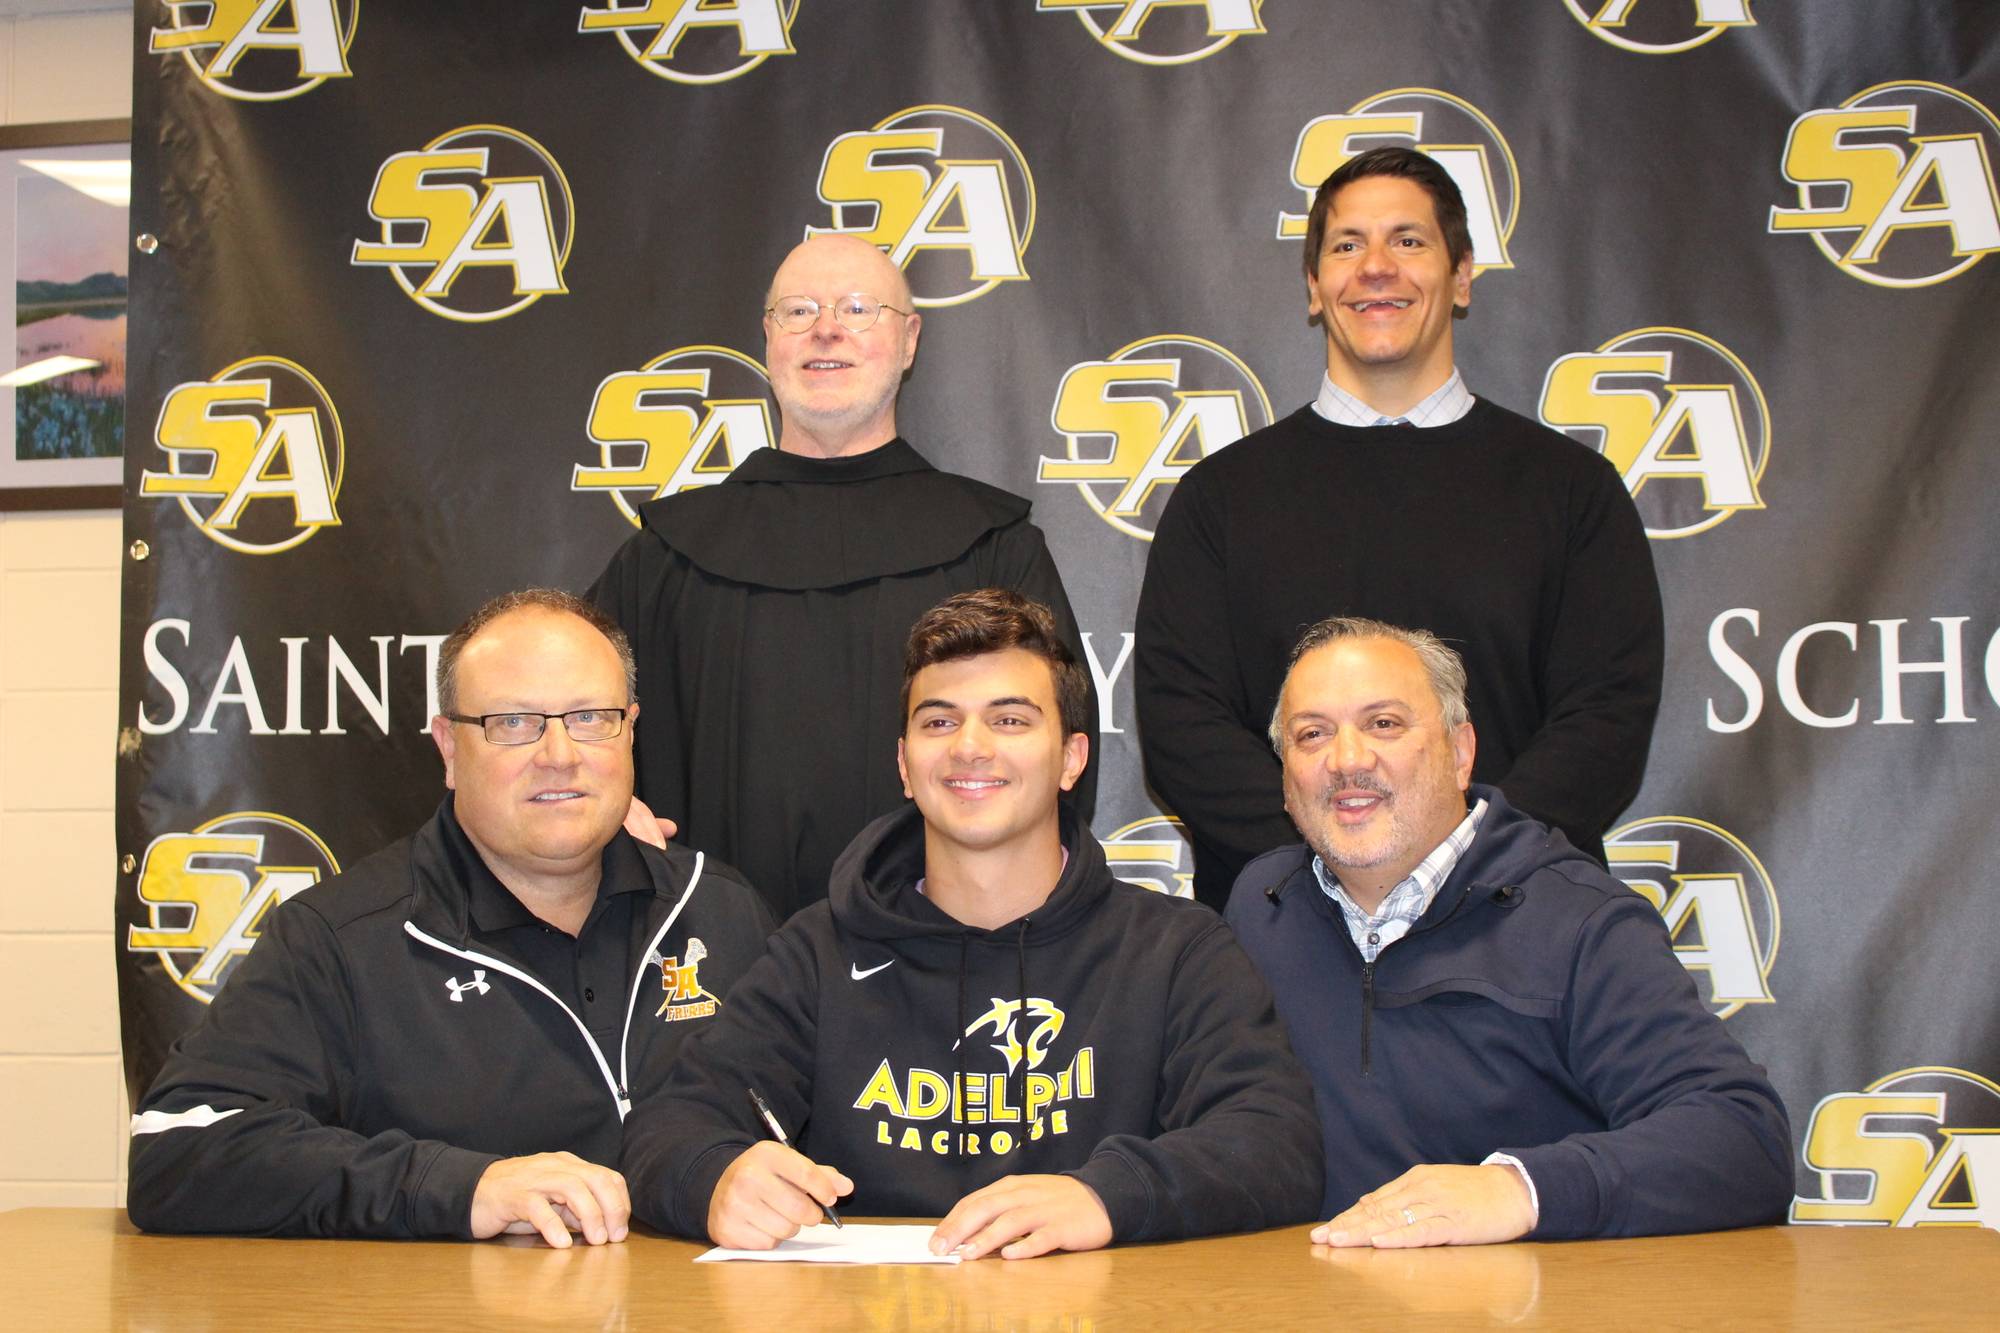 Congratulations to Christopher Pearce on committing to Adelphi University to play Lacrosse